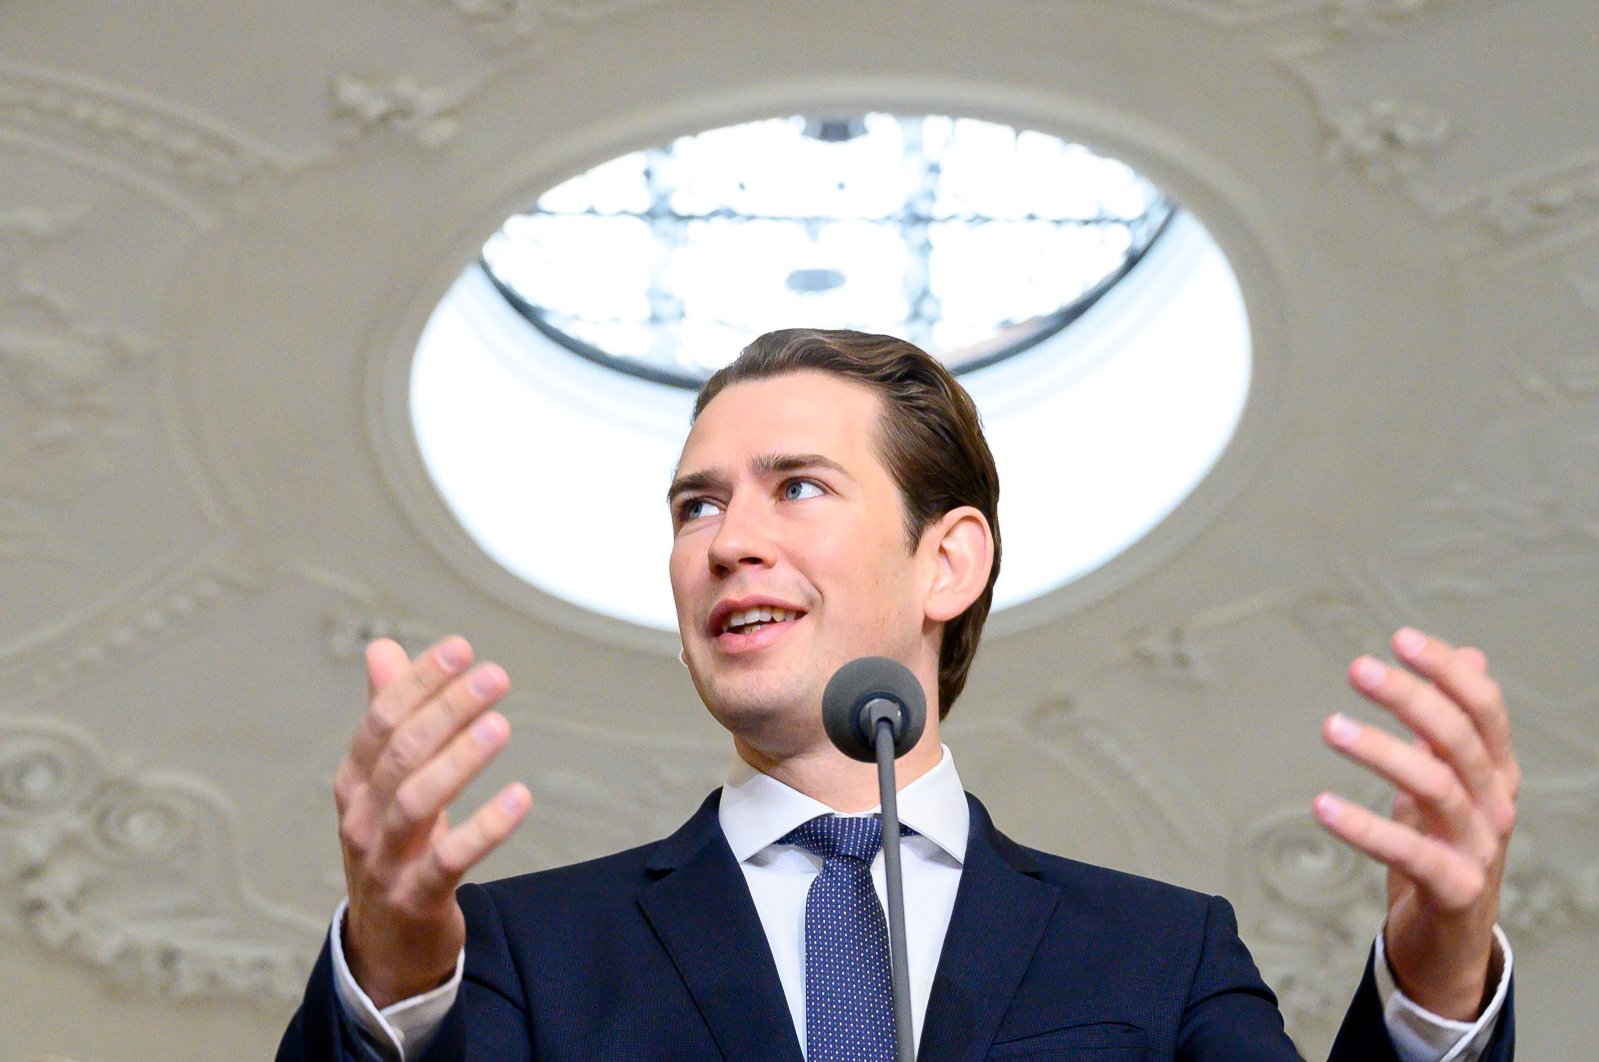 Sebastian Kurz, leader of Austria's People's Party (OeVP) speaks to journalists as he arrives for exploratory talks with Green Party leader Werner Kogler (Unseen) at Winter Palace in Vienna, Austria, Oct. 13, 2019. (AFP Photo)